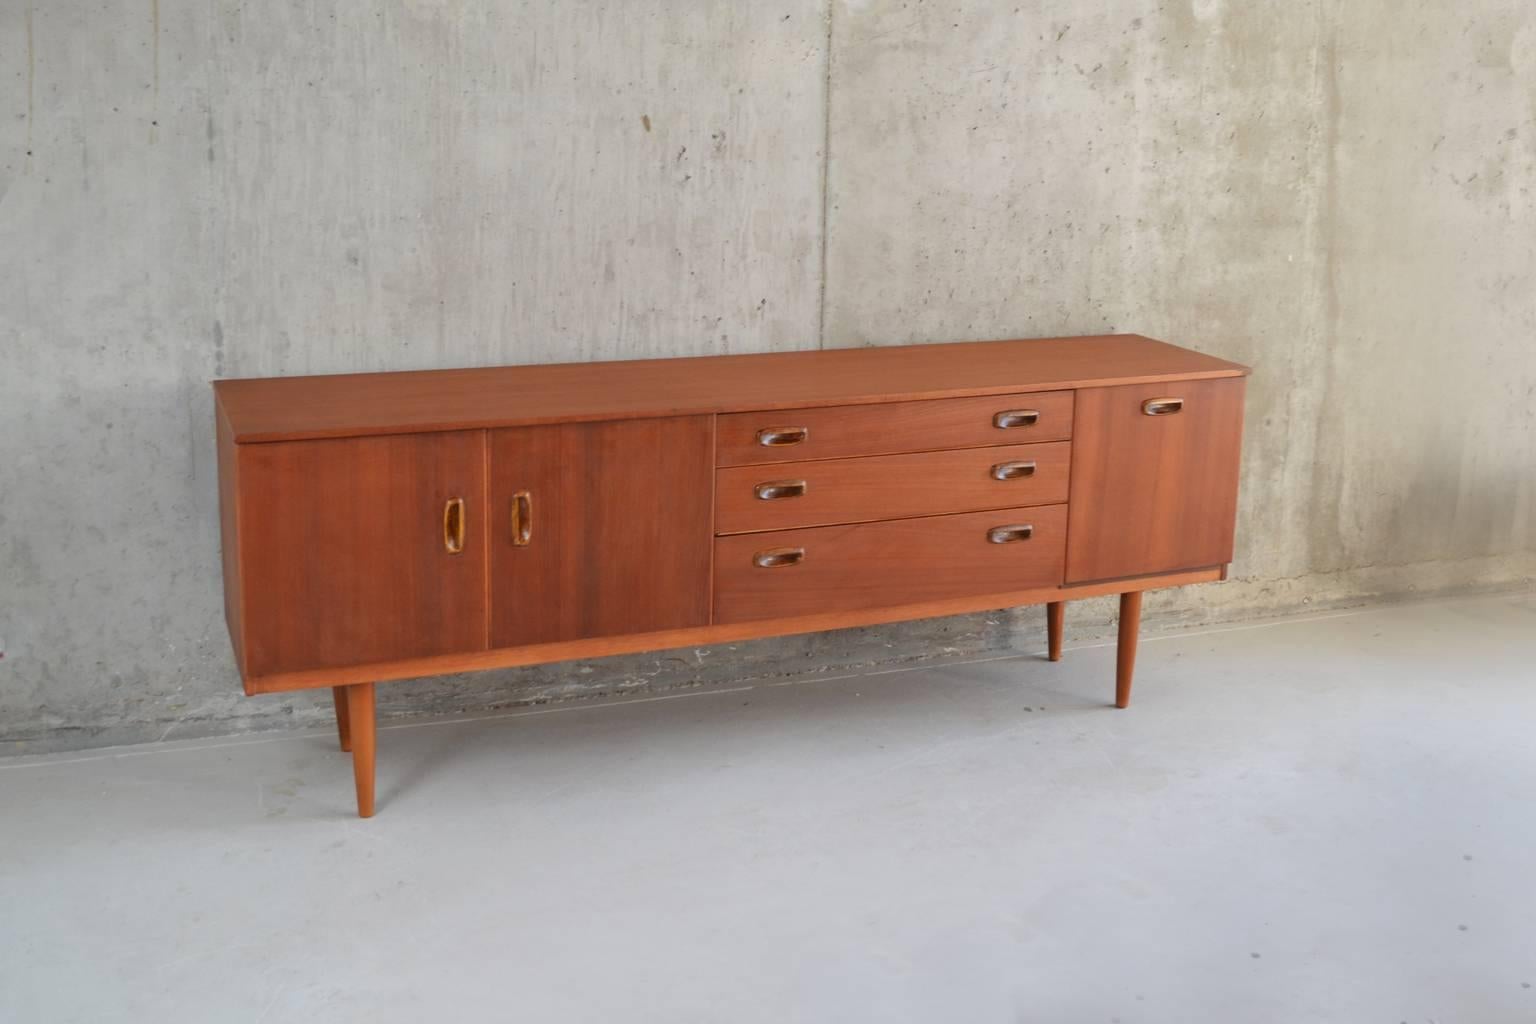 A minimal and stylish sideboard from British furniture company Schreiber. Distinctive textured drawer pulls.
The top drawer is has cutlery compartments. The right hand cupboard is for drinks, there is a door activated light bulb inside, but this is